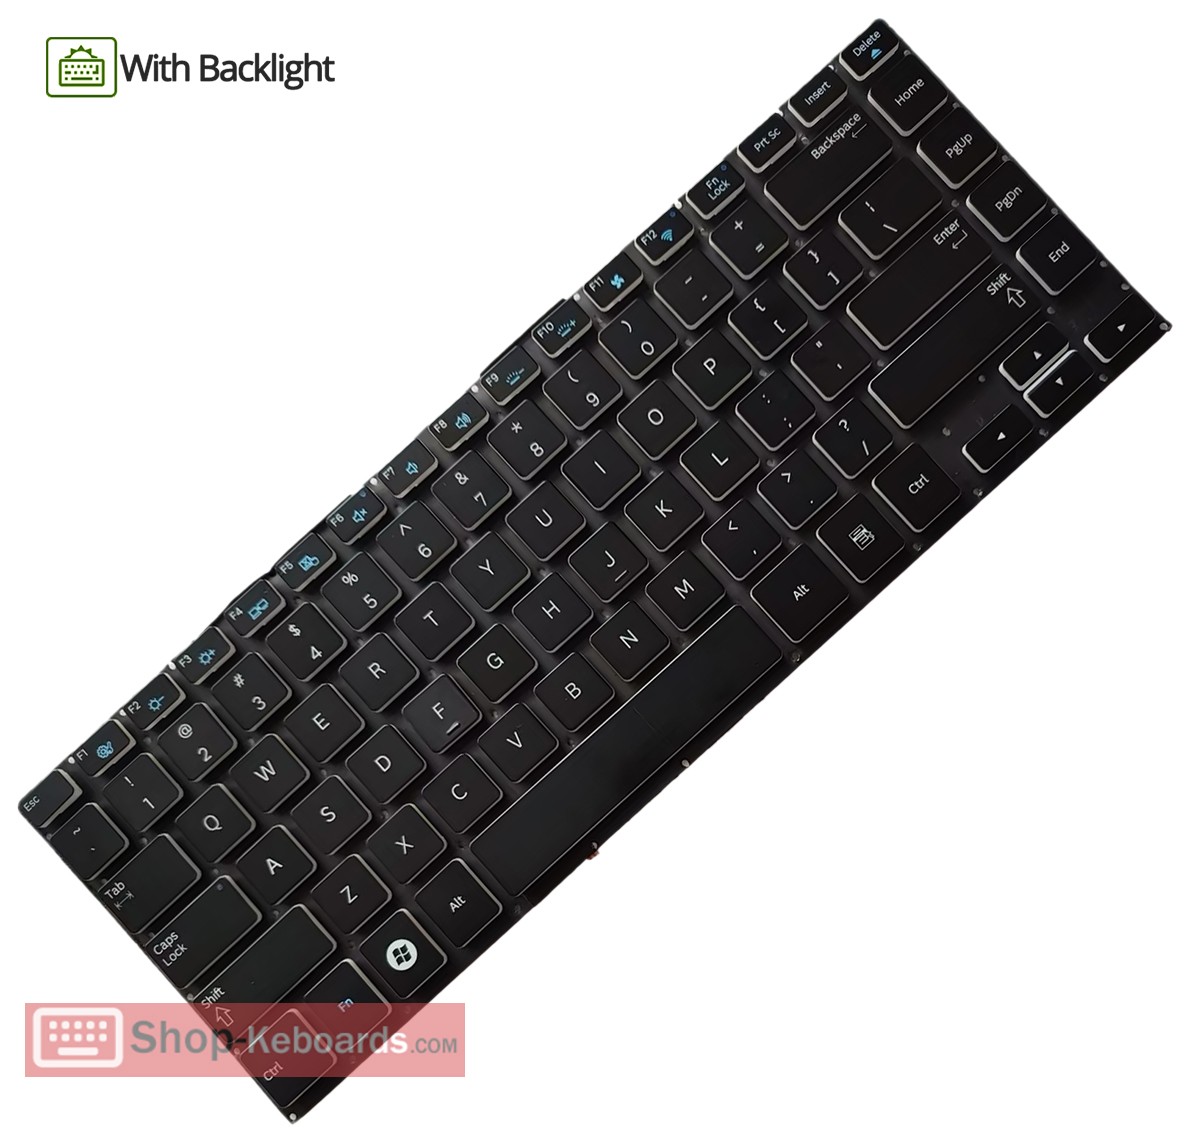 Samsung 700Z4C Keyboard replacement